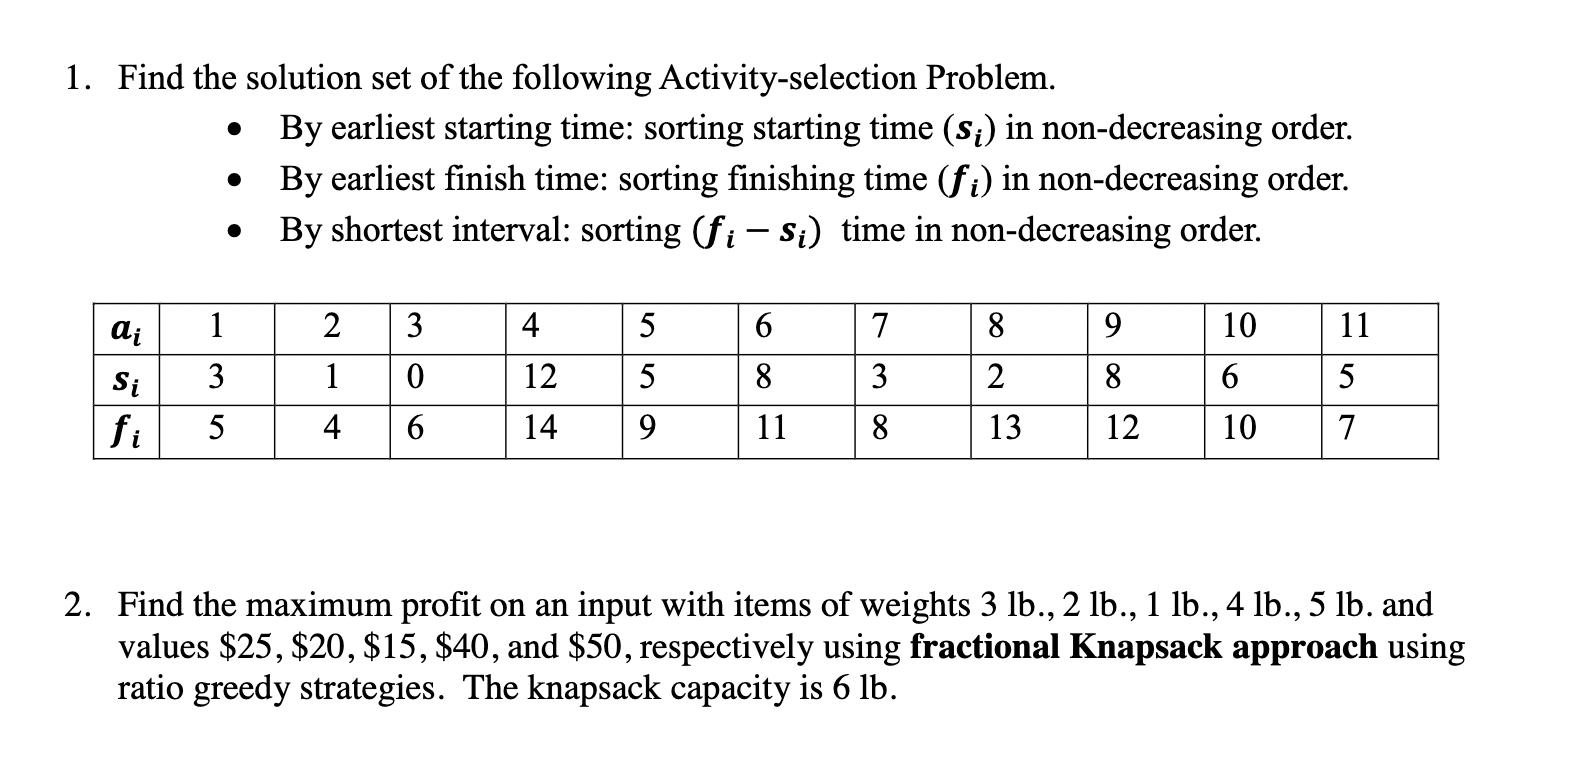 1. Find the solution set of the following Activity-selection Problem.  ai 1 Si 3 fi 5 By earliest starting